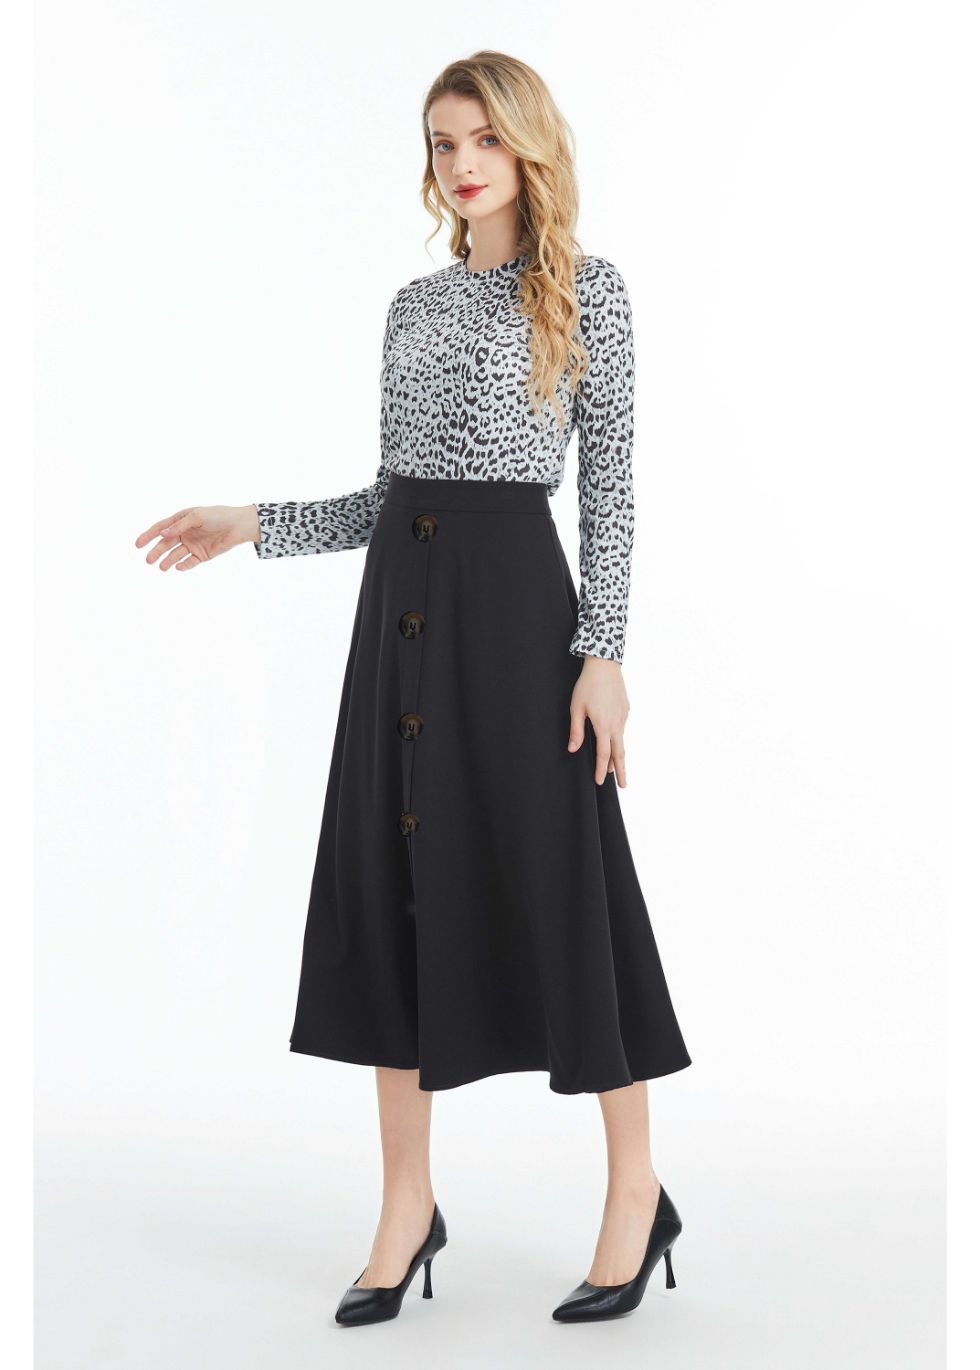 Fully Lined Black Midi Skirt with Front Button Detail - alamaud